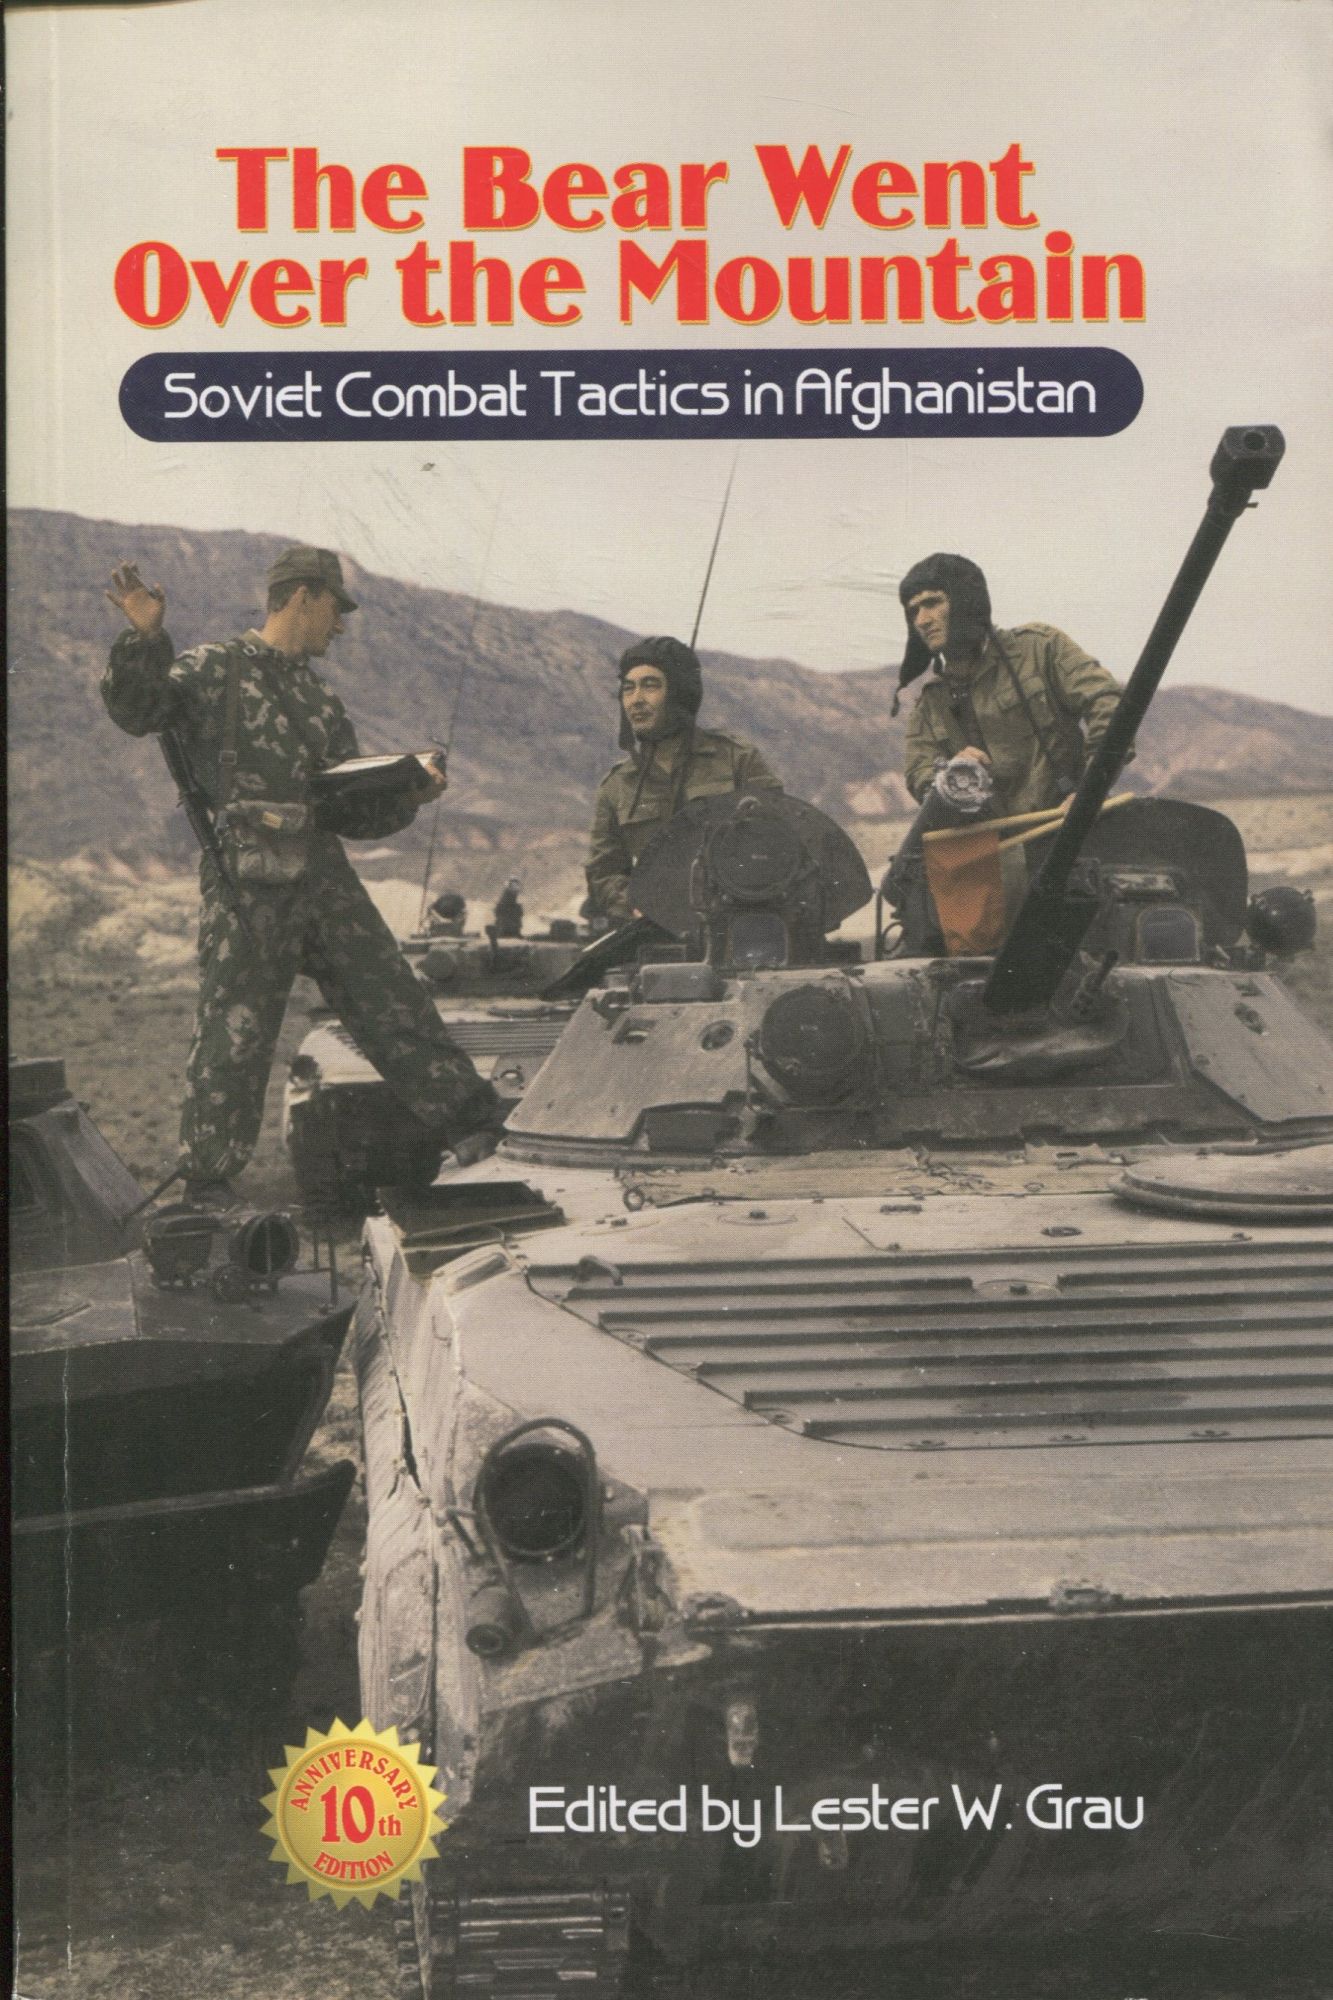 The Bear Went Over the Mountain: 10th Anniversary Edition; Soviet combat tactics in Afghanistan - Grau, Lester W. (editor)